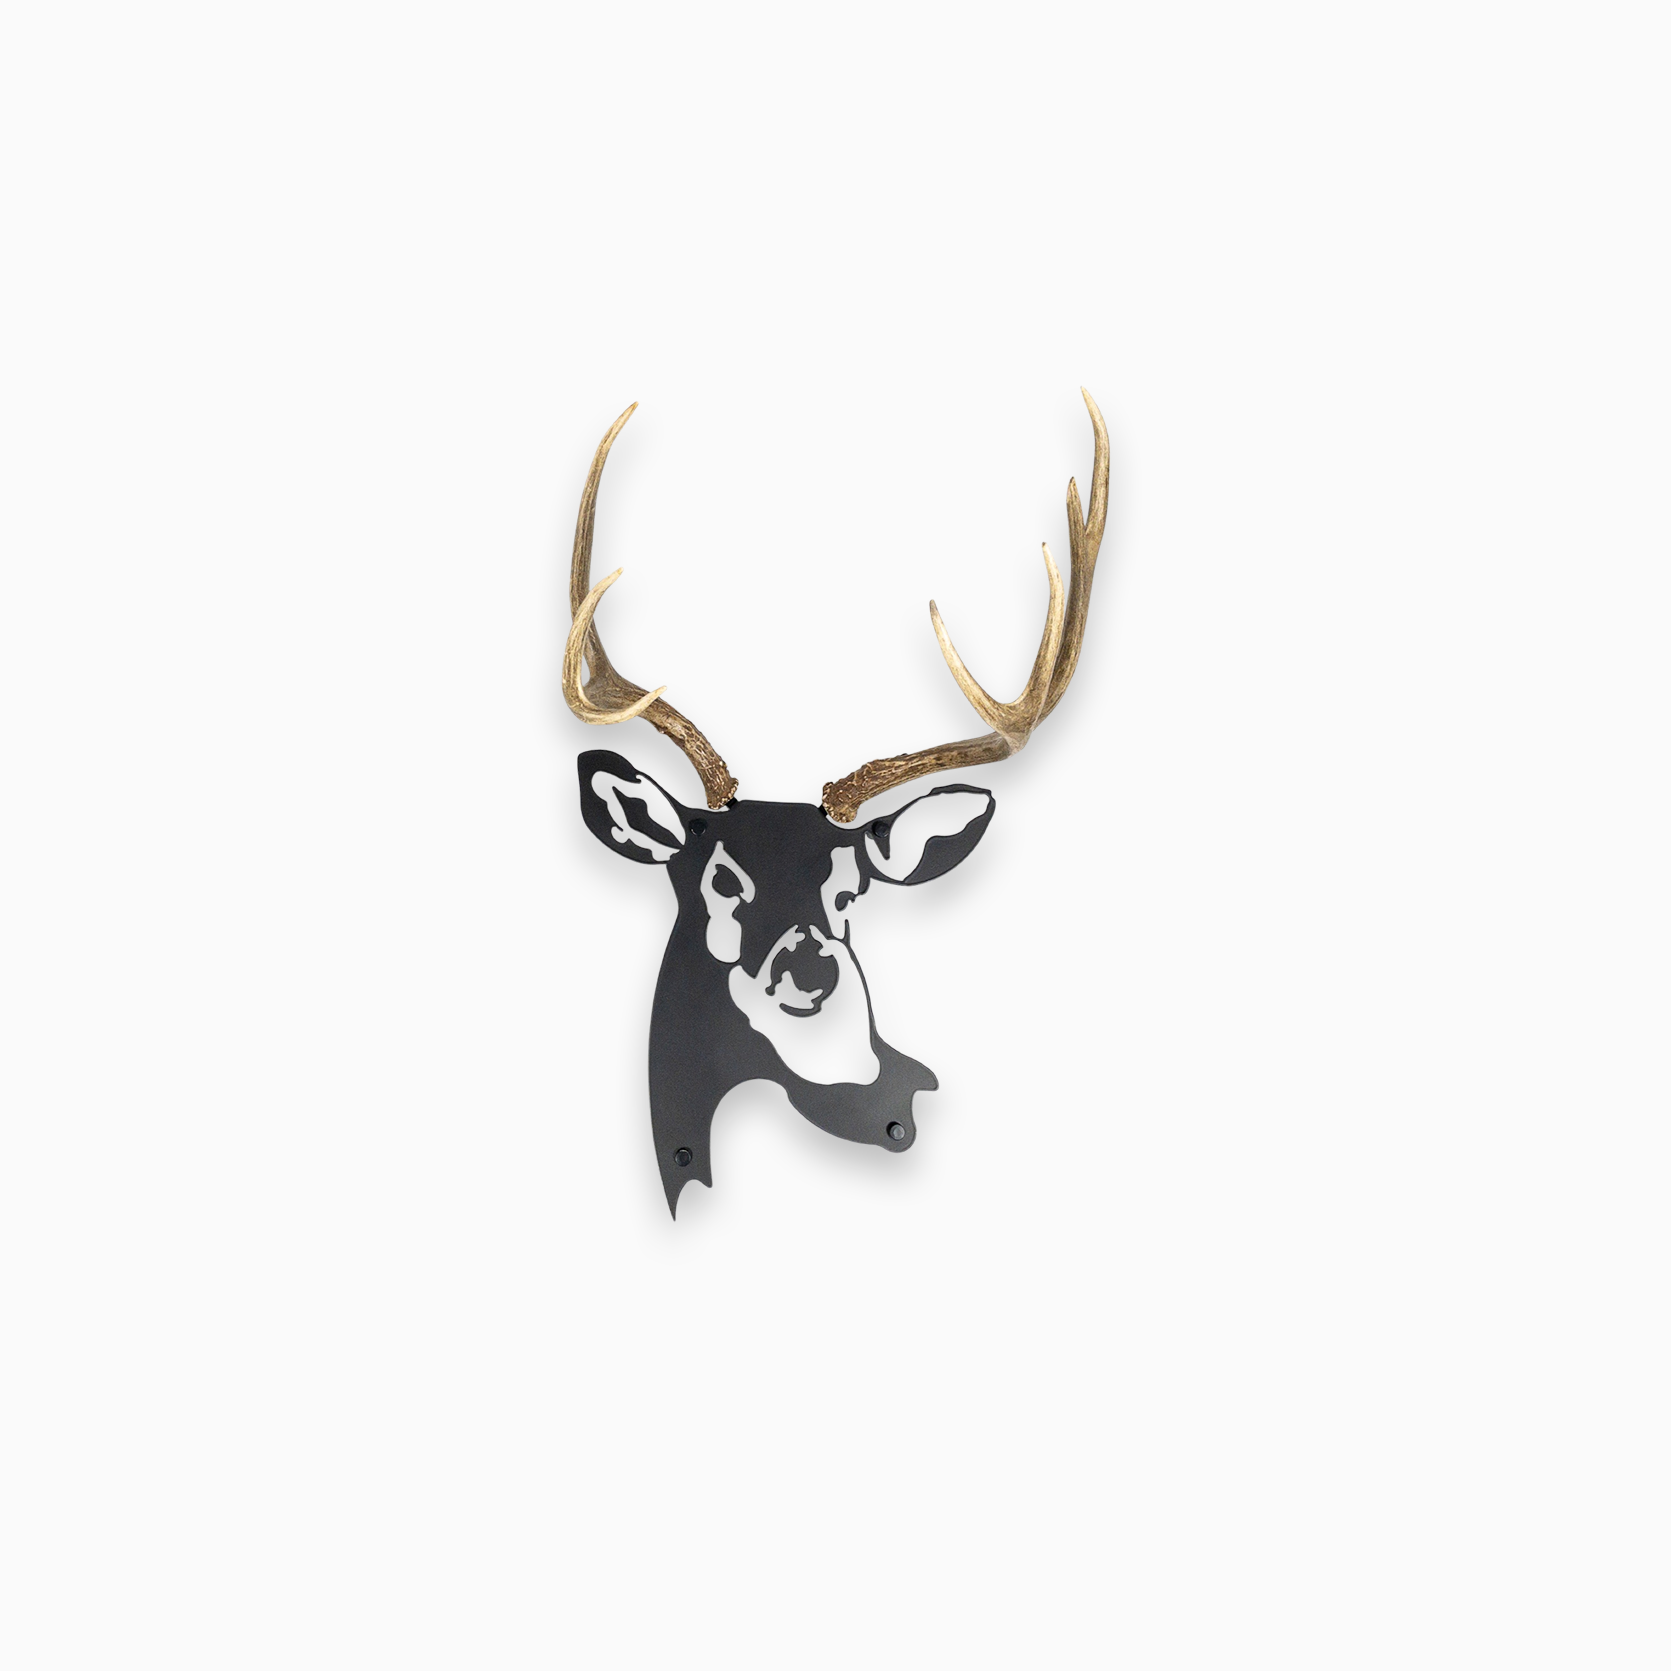 A metal wall decor by Dekor Nature made from real Deer antlers mounted on a metal head